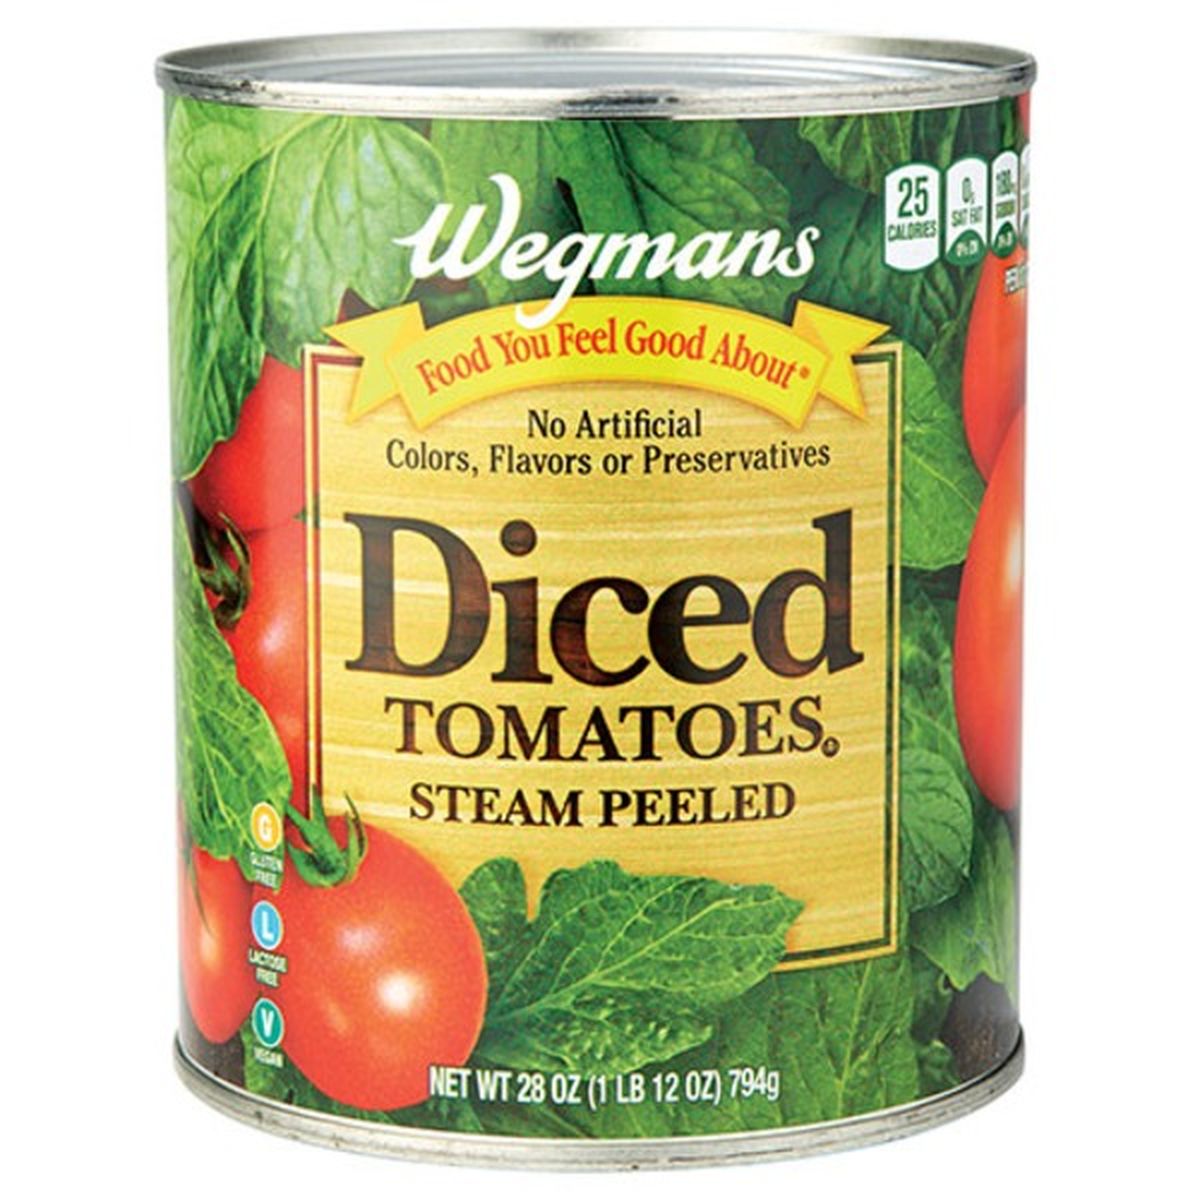 Calories in Wegmans Diced Tomatoes